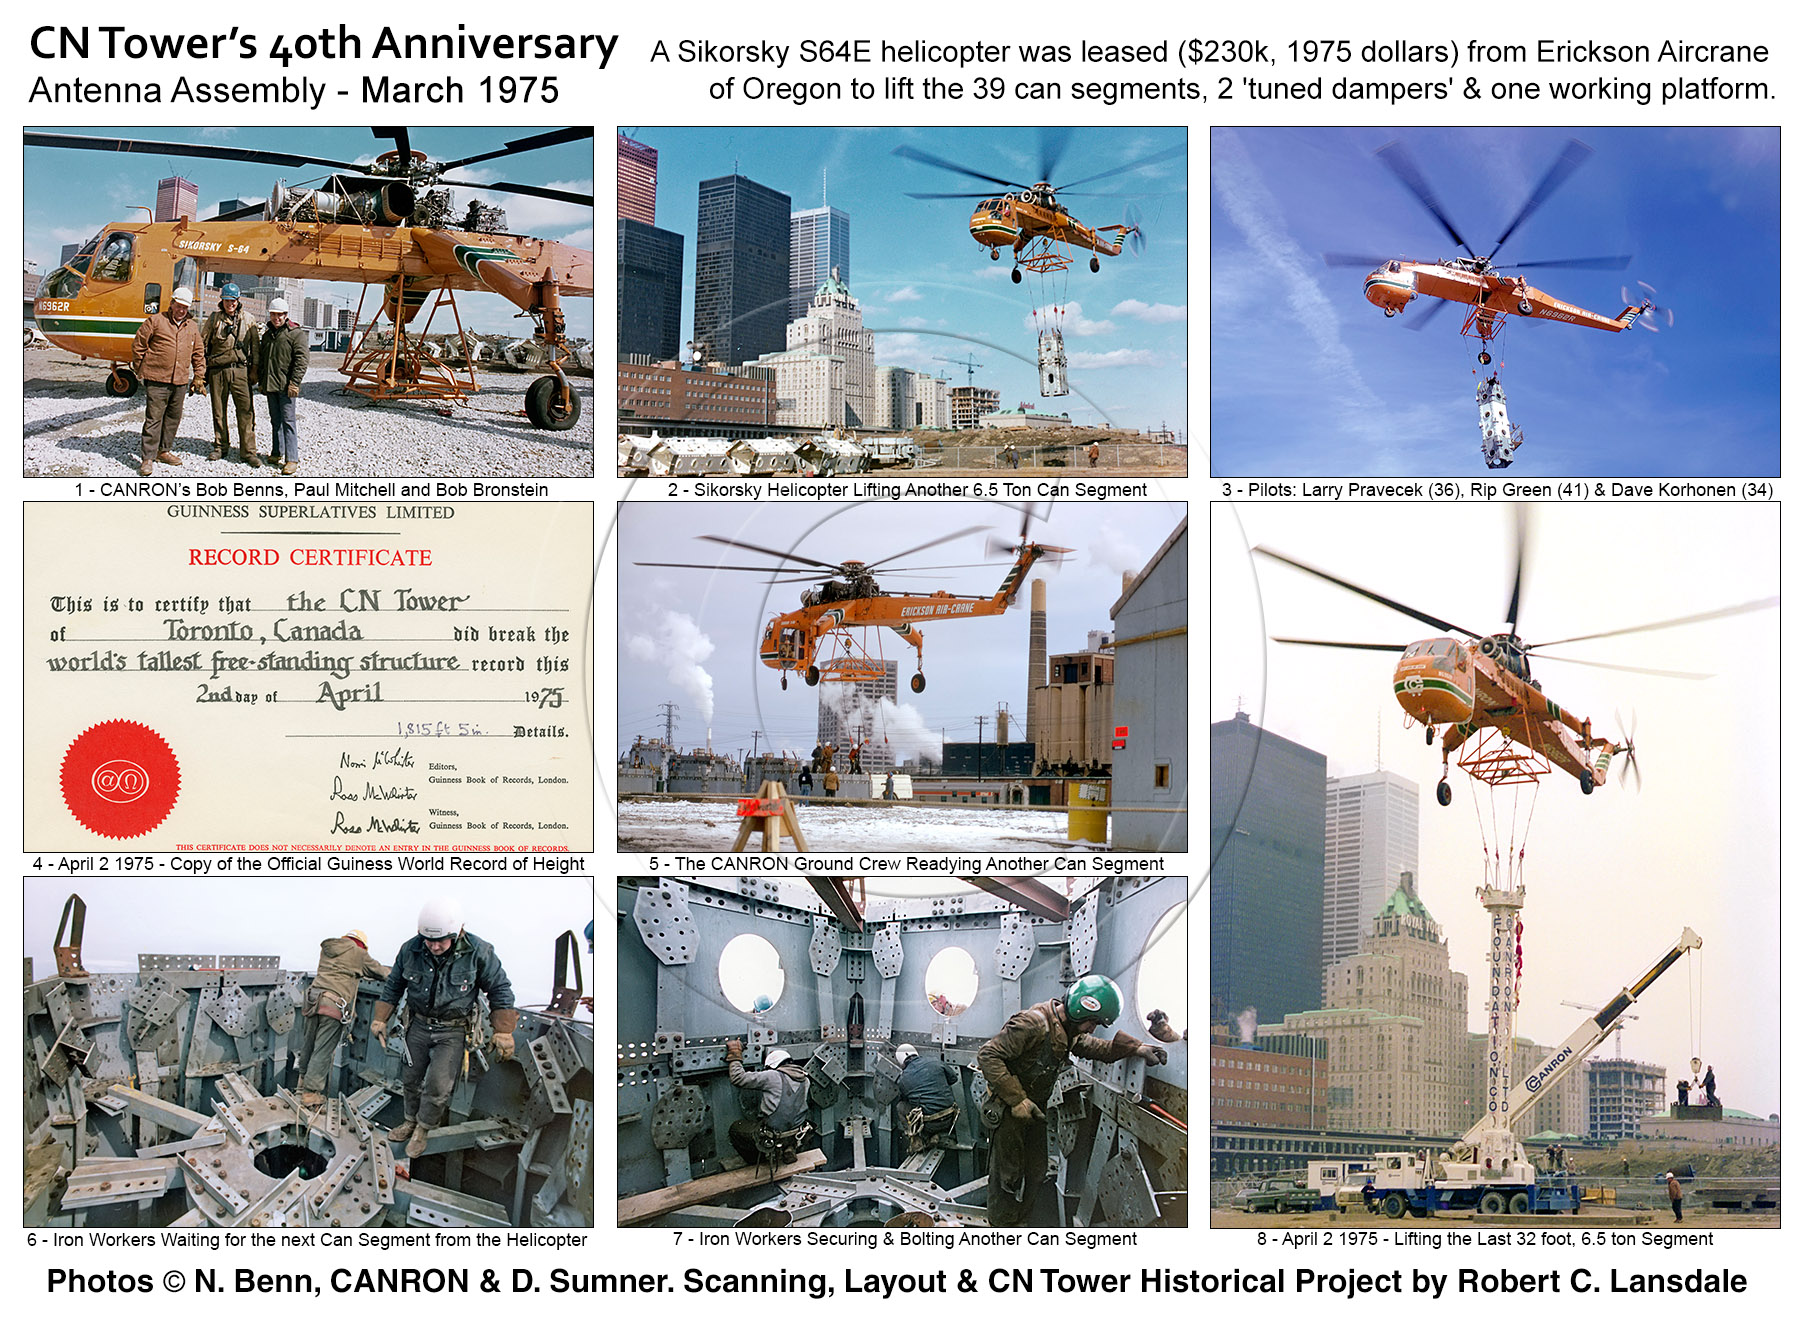 Sikorsky Helicopter Can Stacking - March 1975.jpg